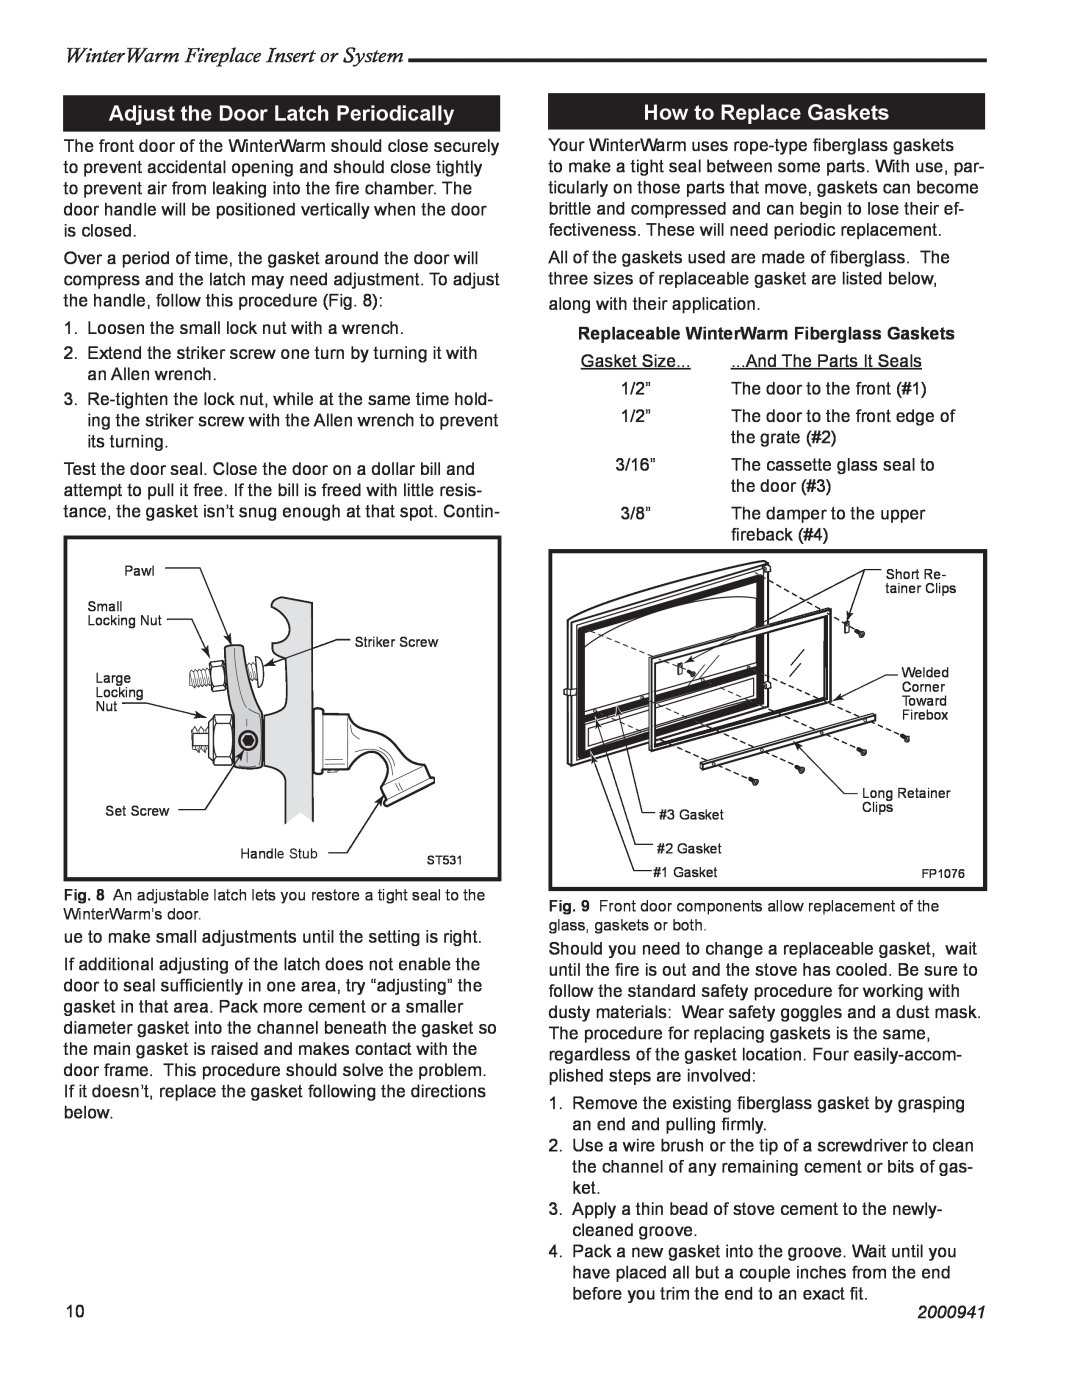 Vermont Casting 2100 Adjust the Door Latch Periodically, How to Replace Gaskets, WinterWarm Fireplace Insert or System 